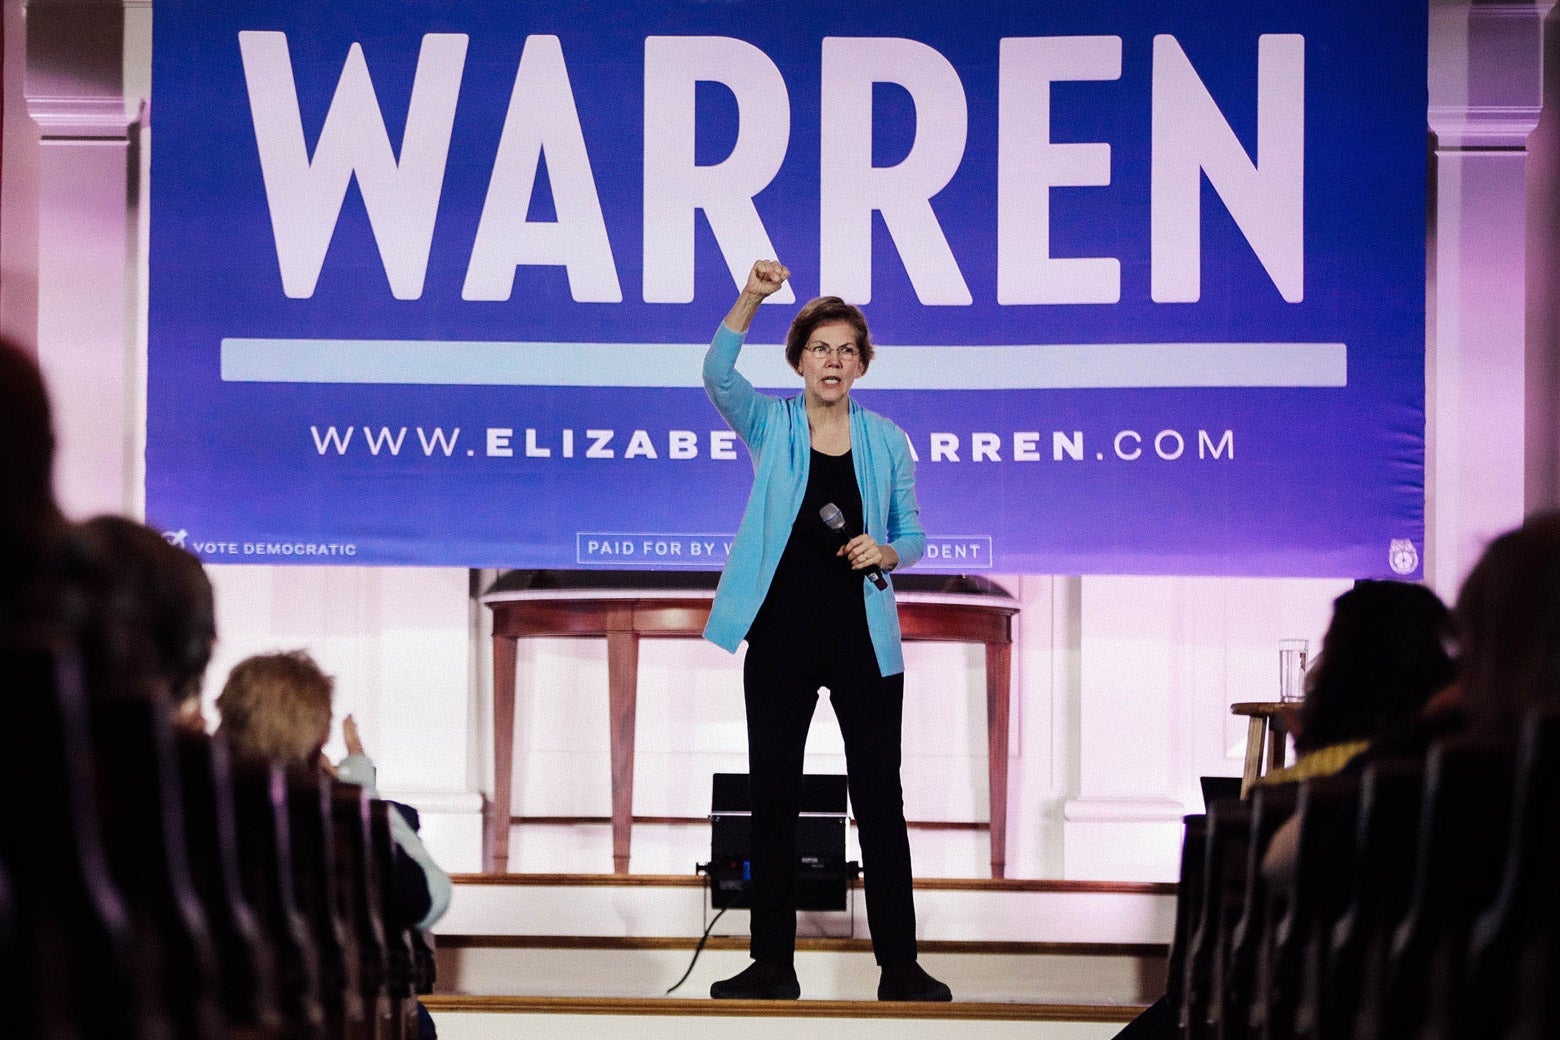 Elizabeth Warren raises her fist and holds a mic in front of a banner bearing her name at a campaign event.